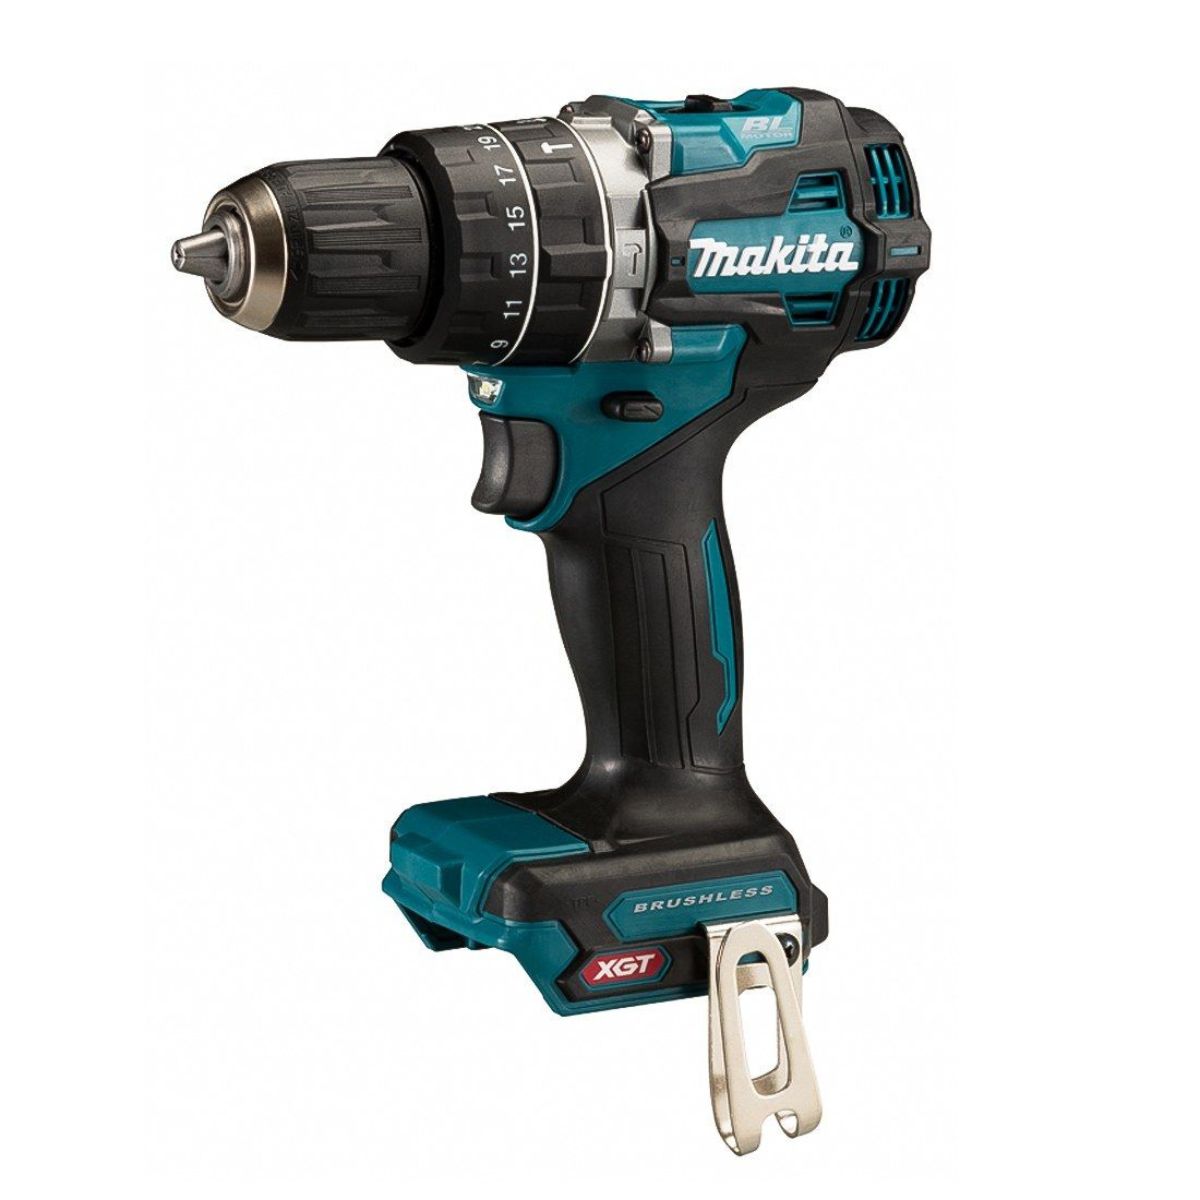 Makita HP002GZ01 40Vmax Brushless Combi Drill XGT Body Only with Case